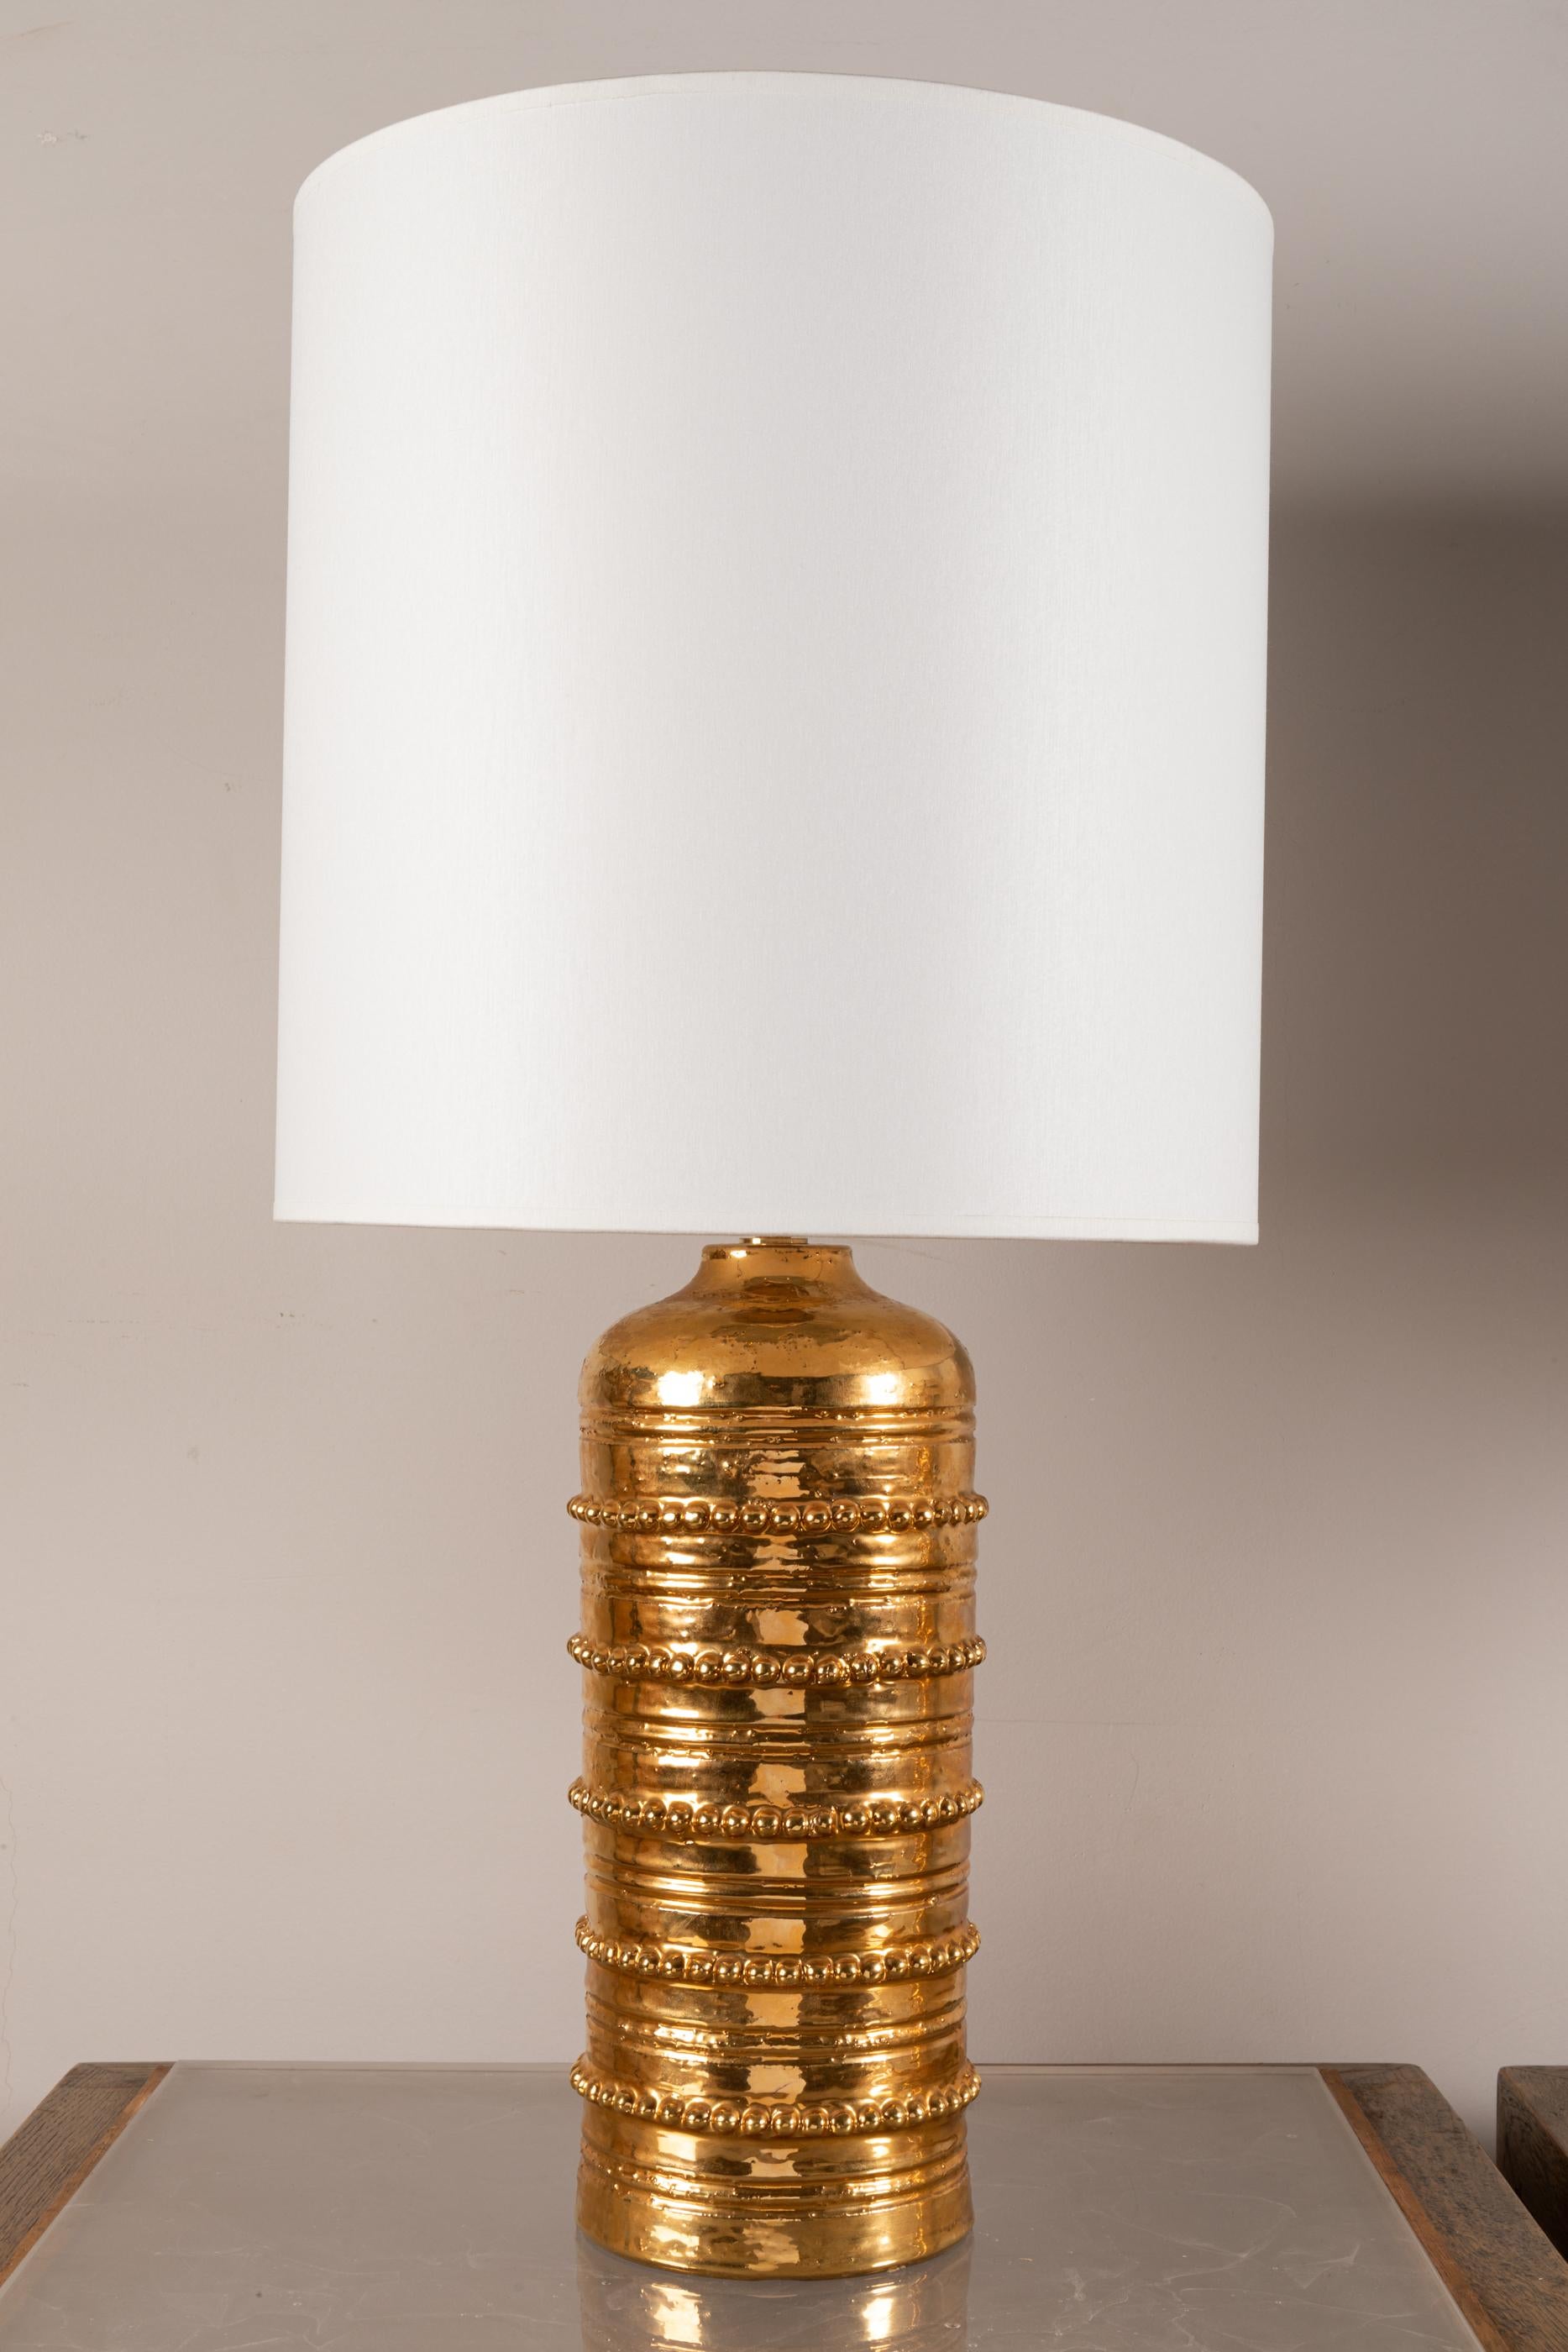 Pair of Gilded Ceramic Lamps by Bitossi 1